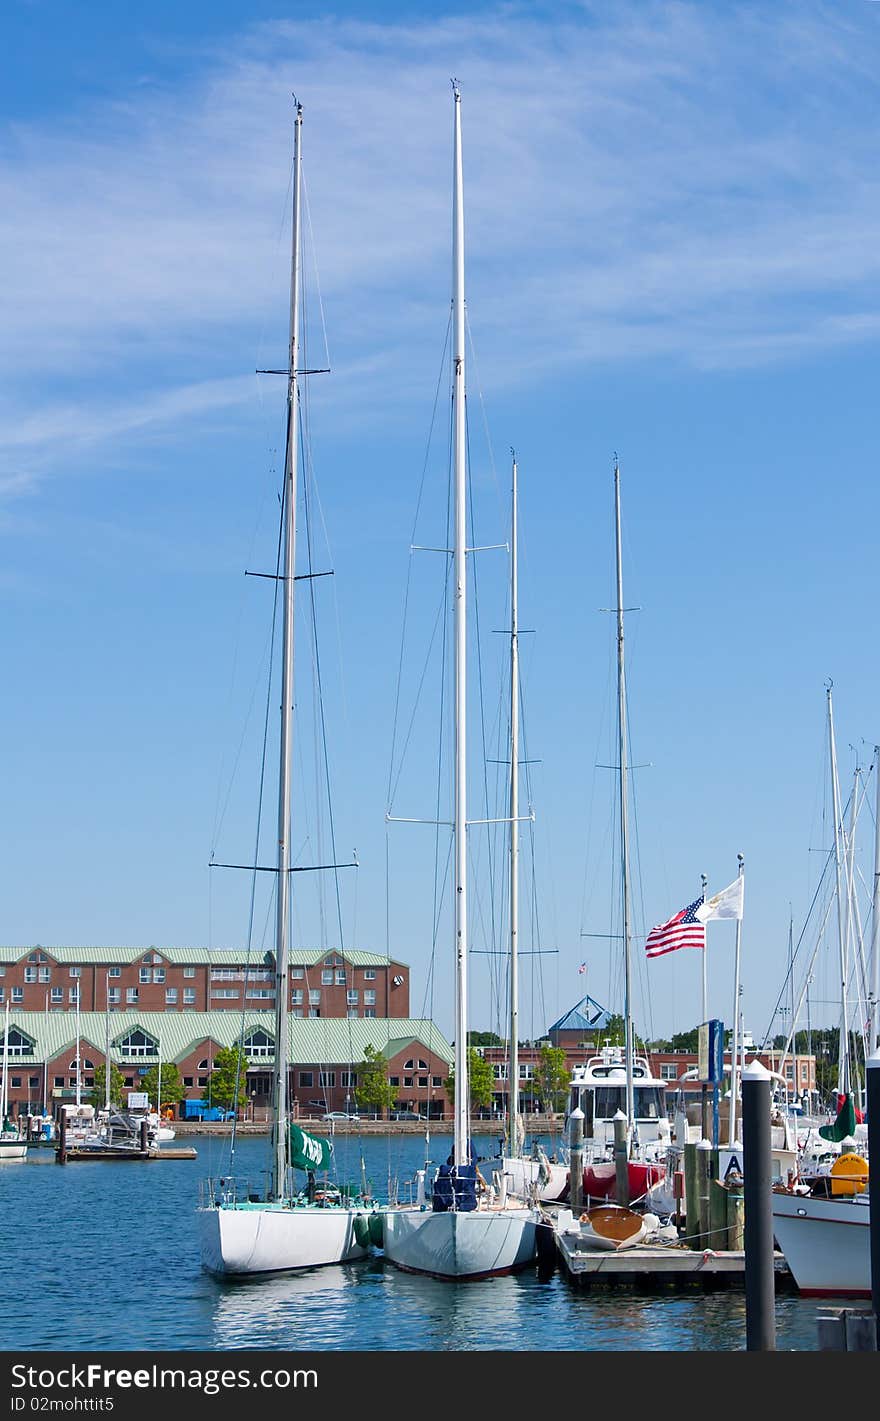 Tall masted sailboats docked in a harbor. Tall masted sailboats docked in a harbor